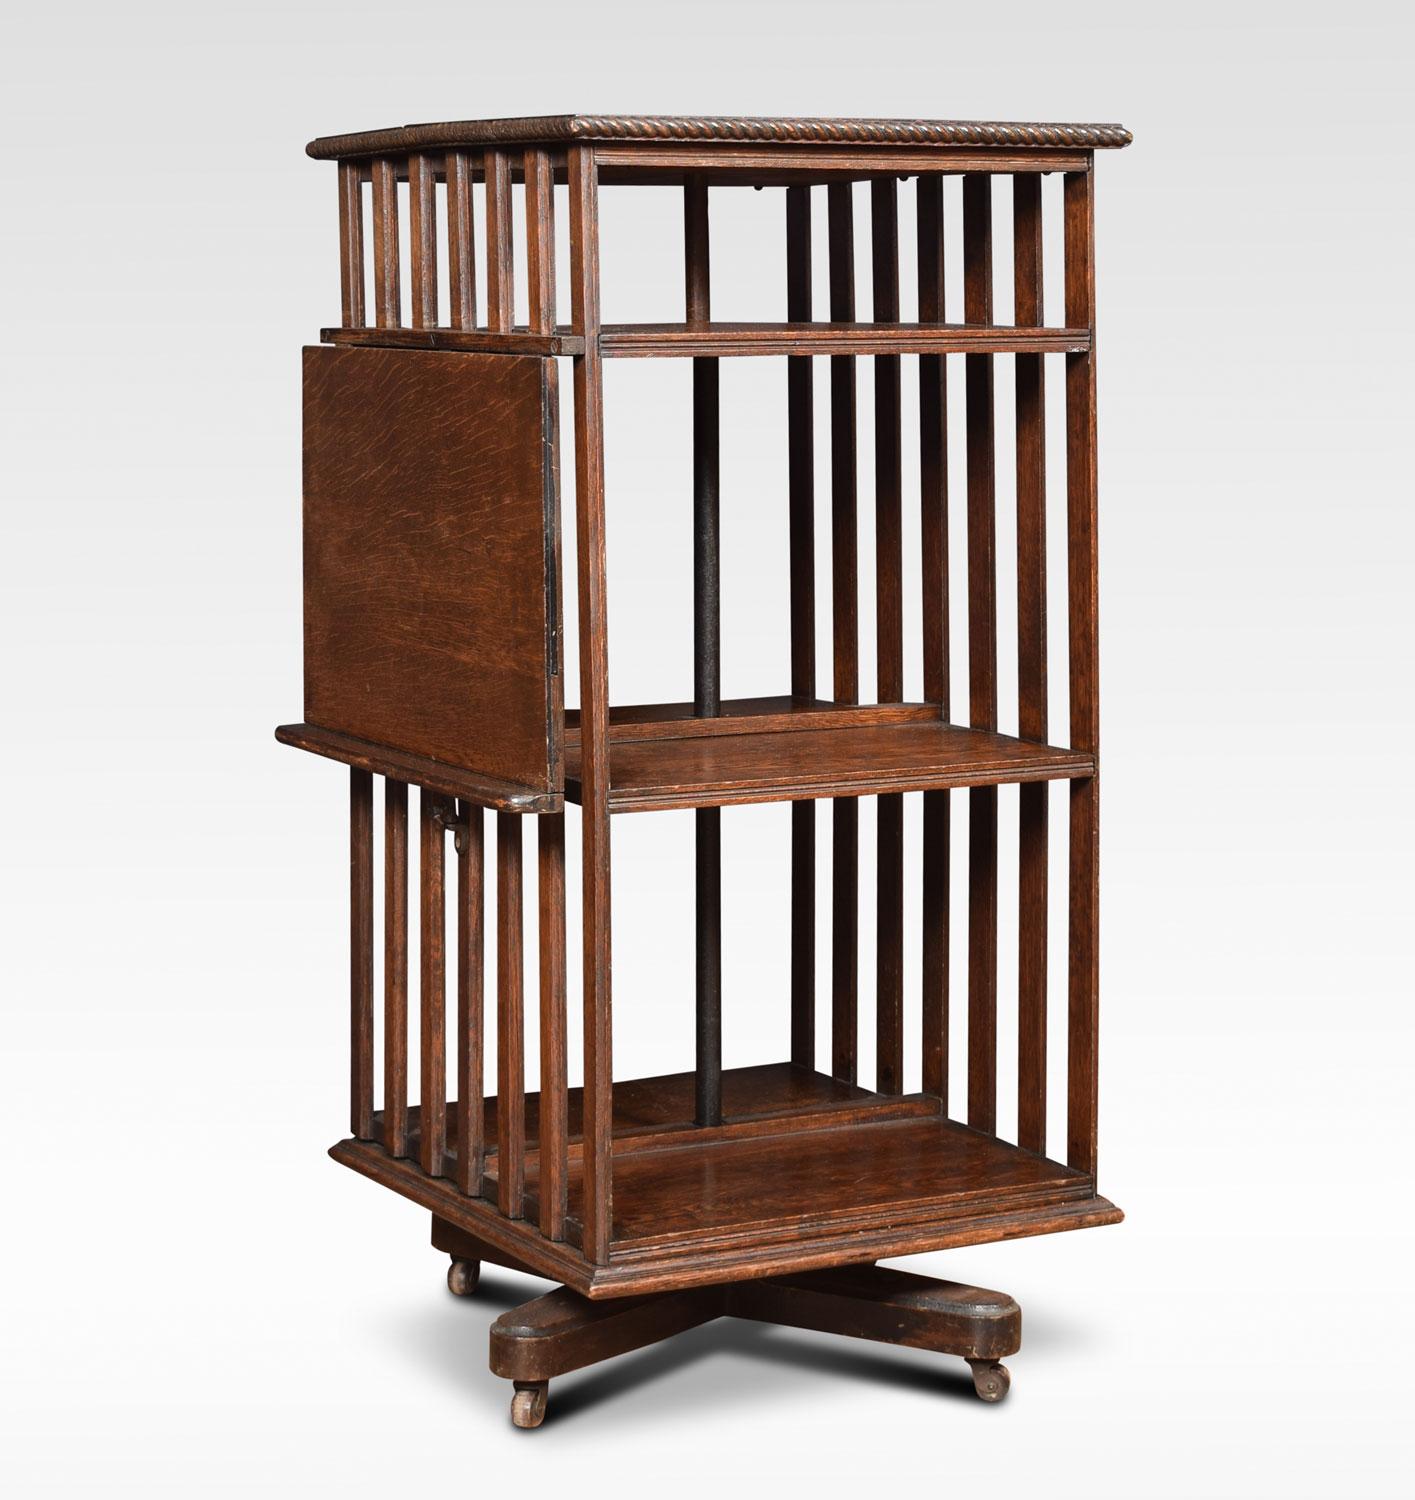 Oak three-tier revolving bookcase, the square moulded top above an arrangement of shelves, having unusual lift up reading rest to the side. All raised up on cruciform base, terminating in brass caps and ceramic castors.
Dimensions:
Height 41.5